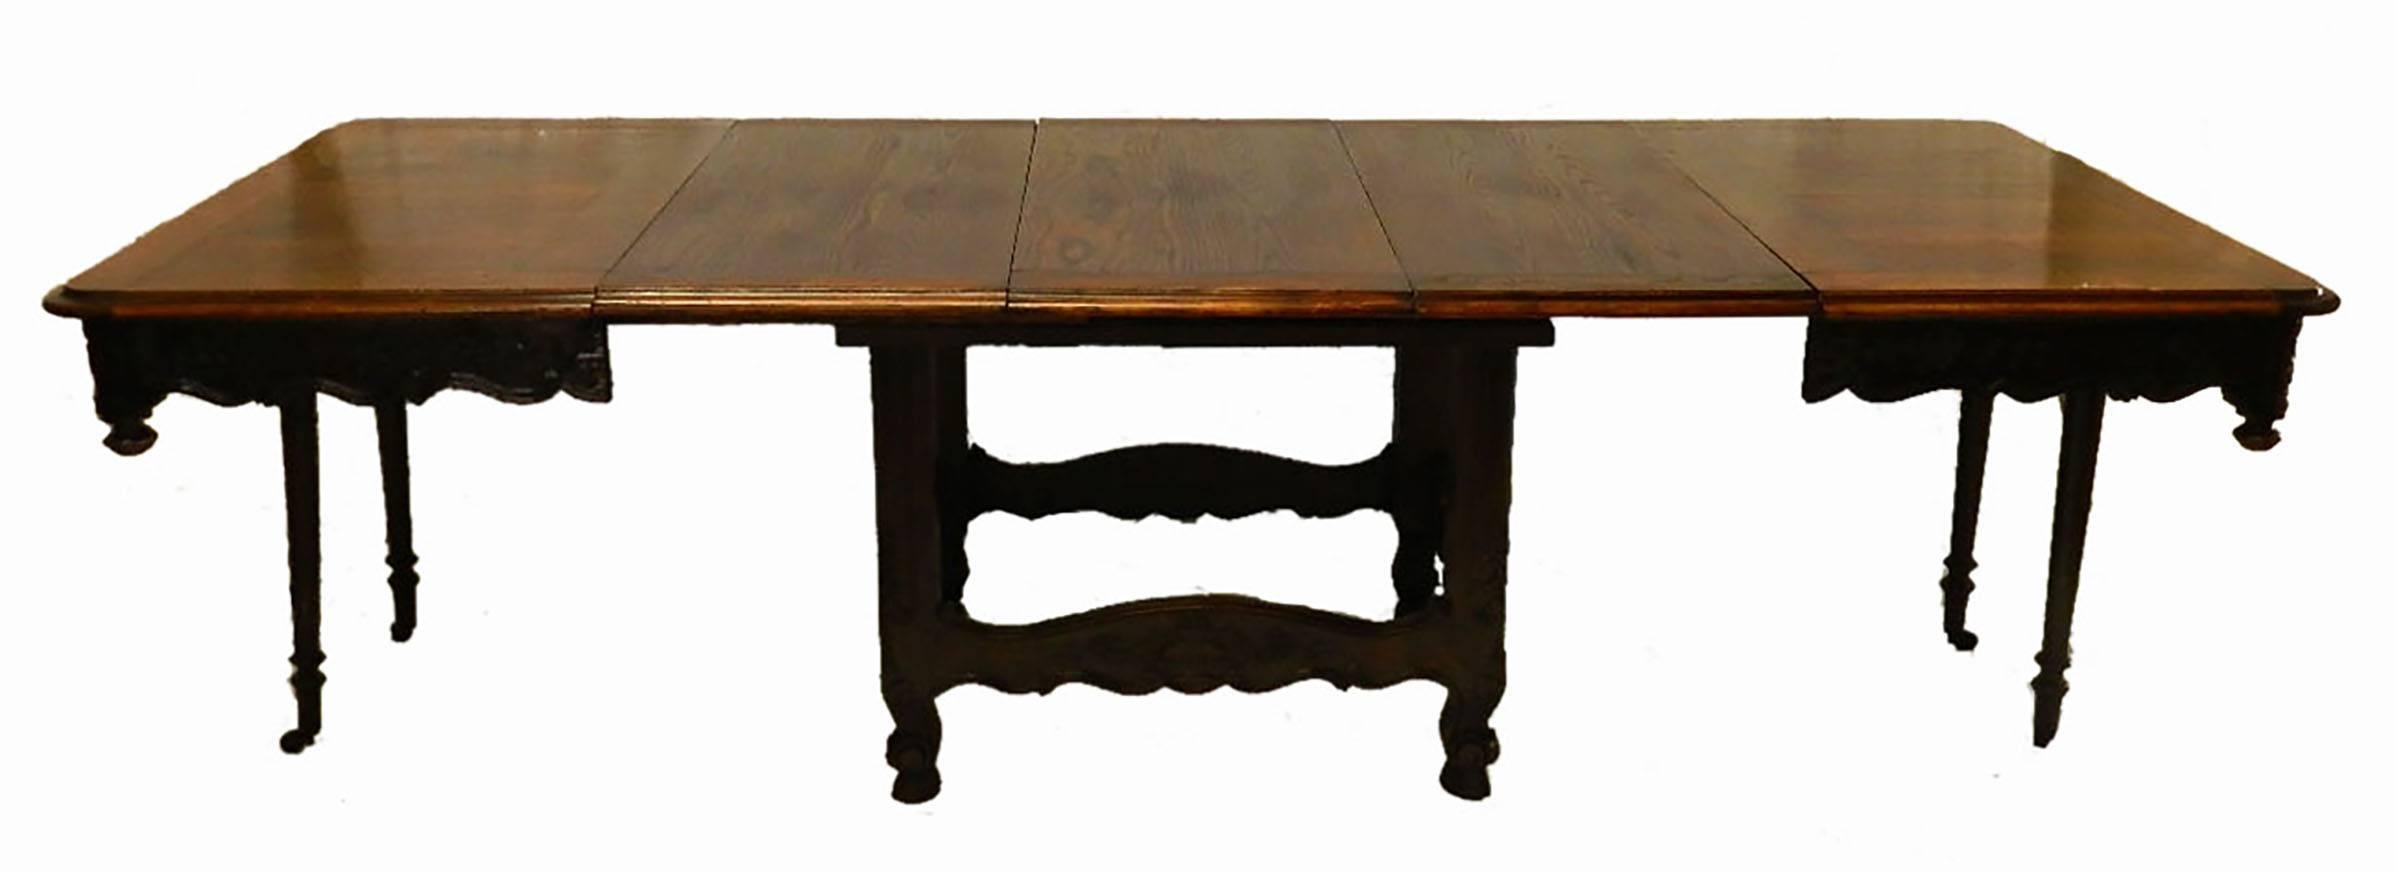 Rare French, 19th century, Provençal three-leaf extending dining table.
Walnut profusely carved to base.
Hard to find mid-19th century, Louis XV revival.
The 3 later extra leaves unusually for a French extending dining table are solid, polished and